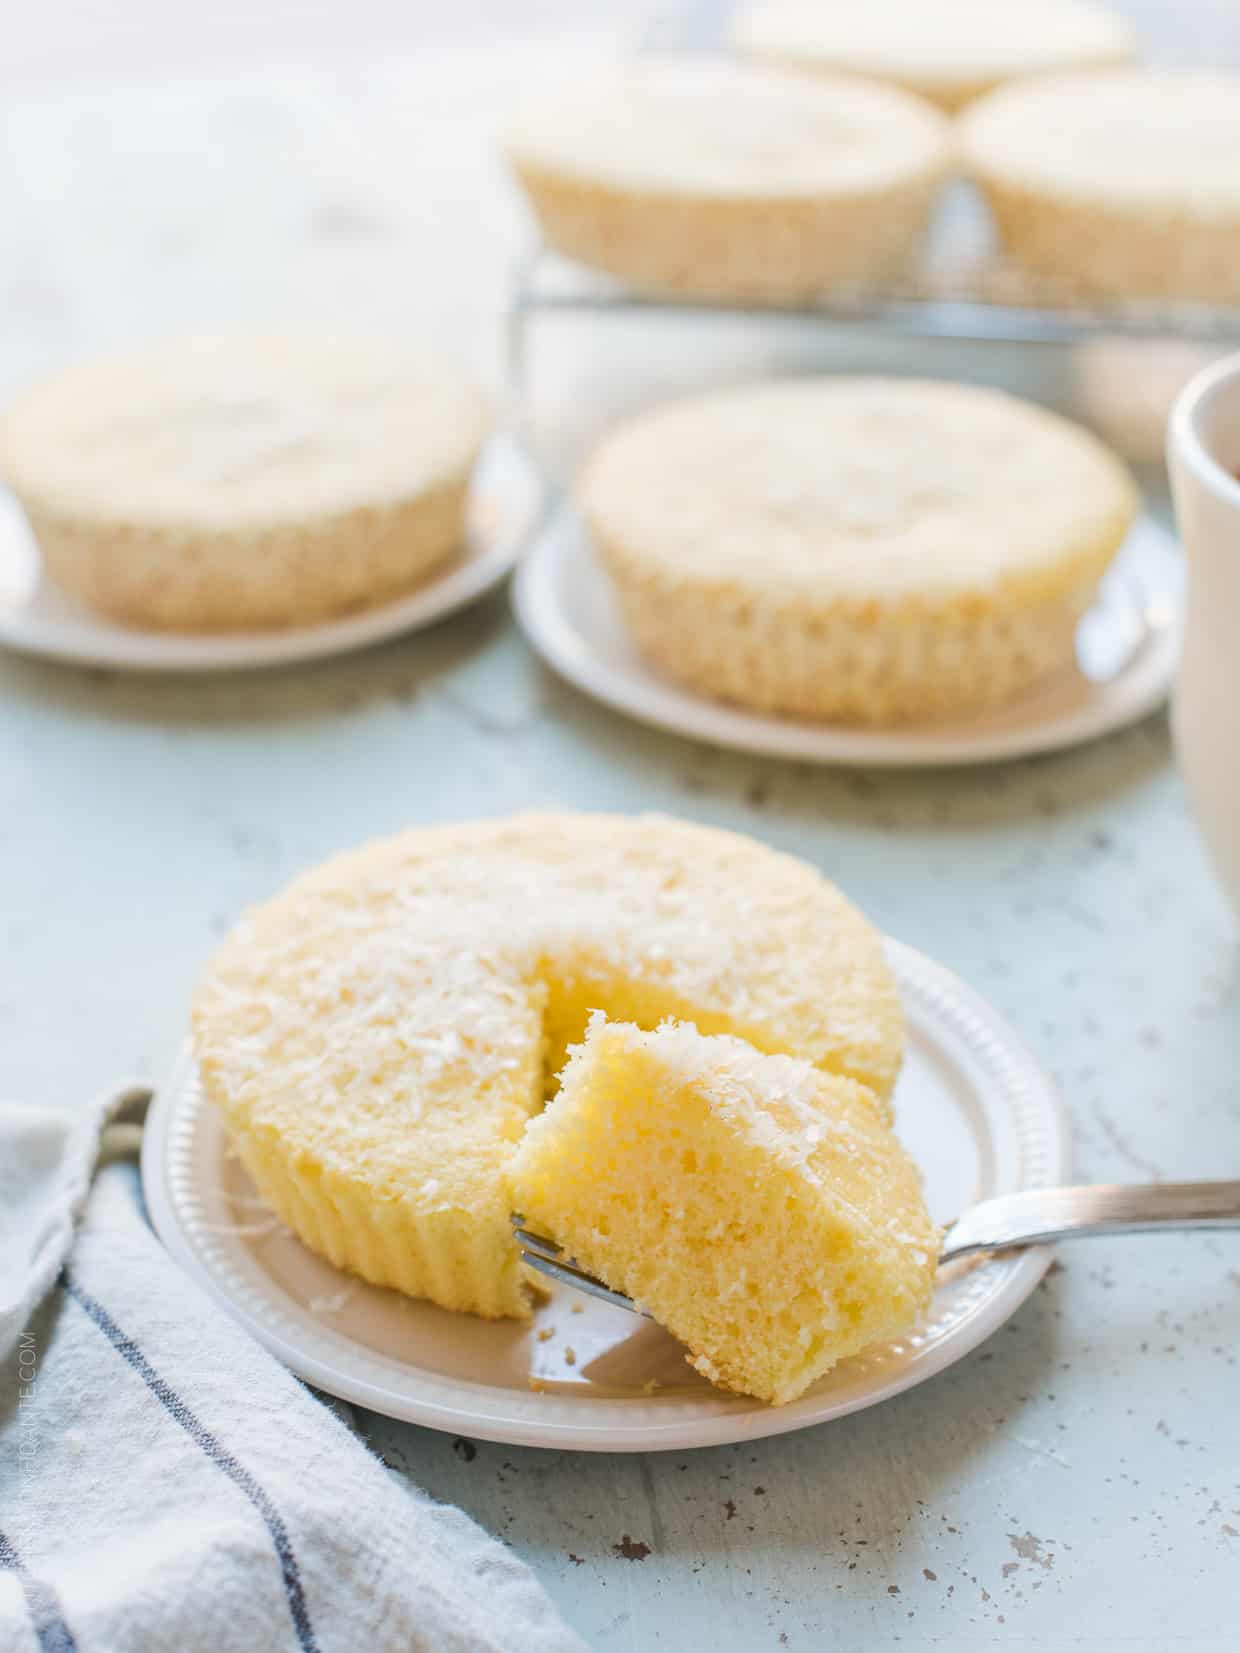 Mamon is a very light and airy Filipino Sponge Cake and a classic snack cake found in bakeries in the Philippines. Make it at home with this simple recipe.